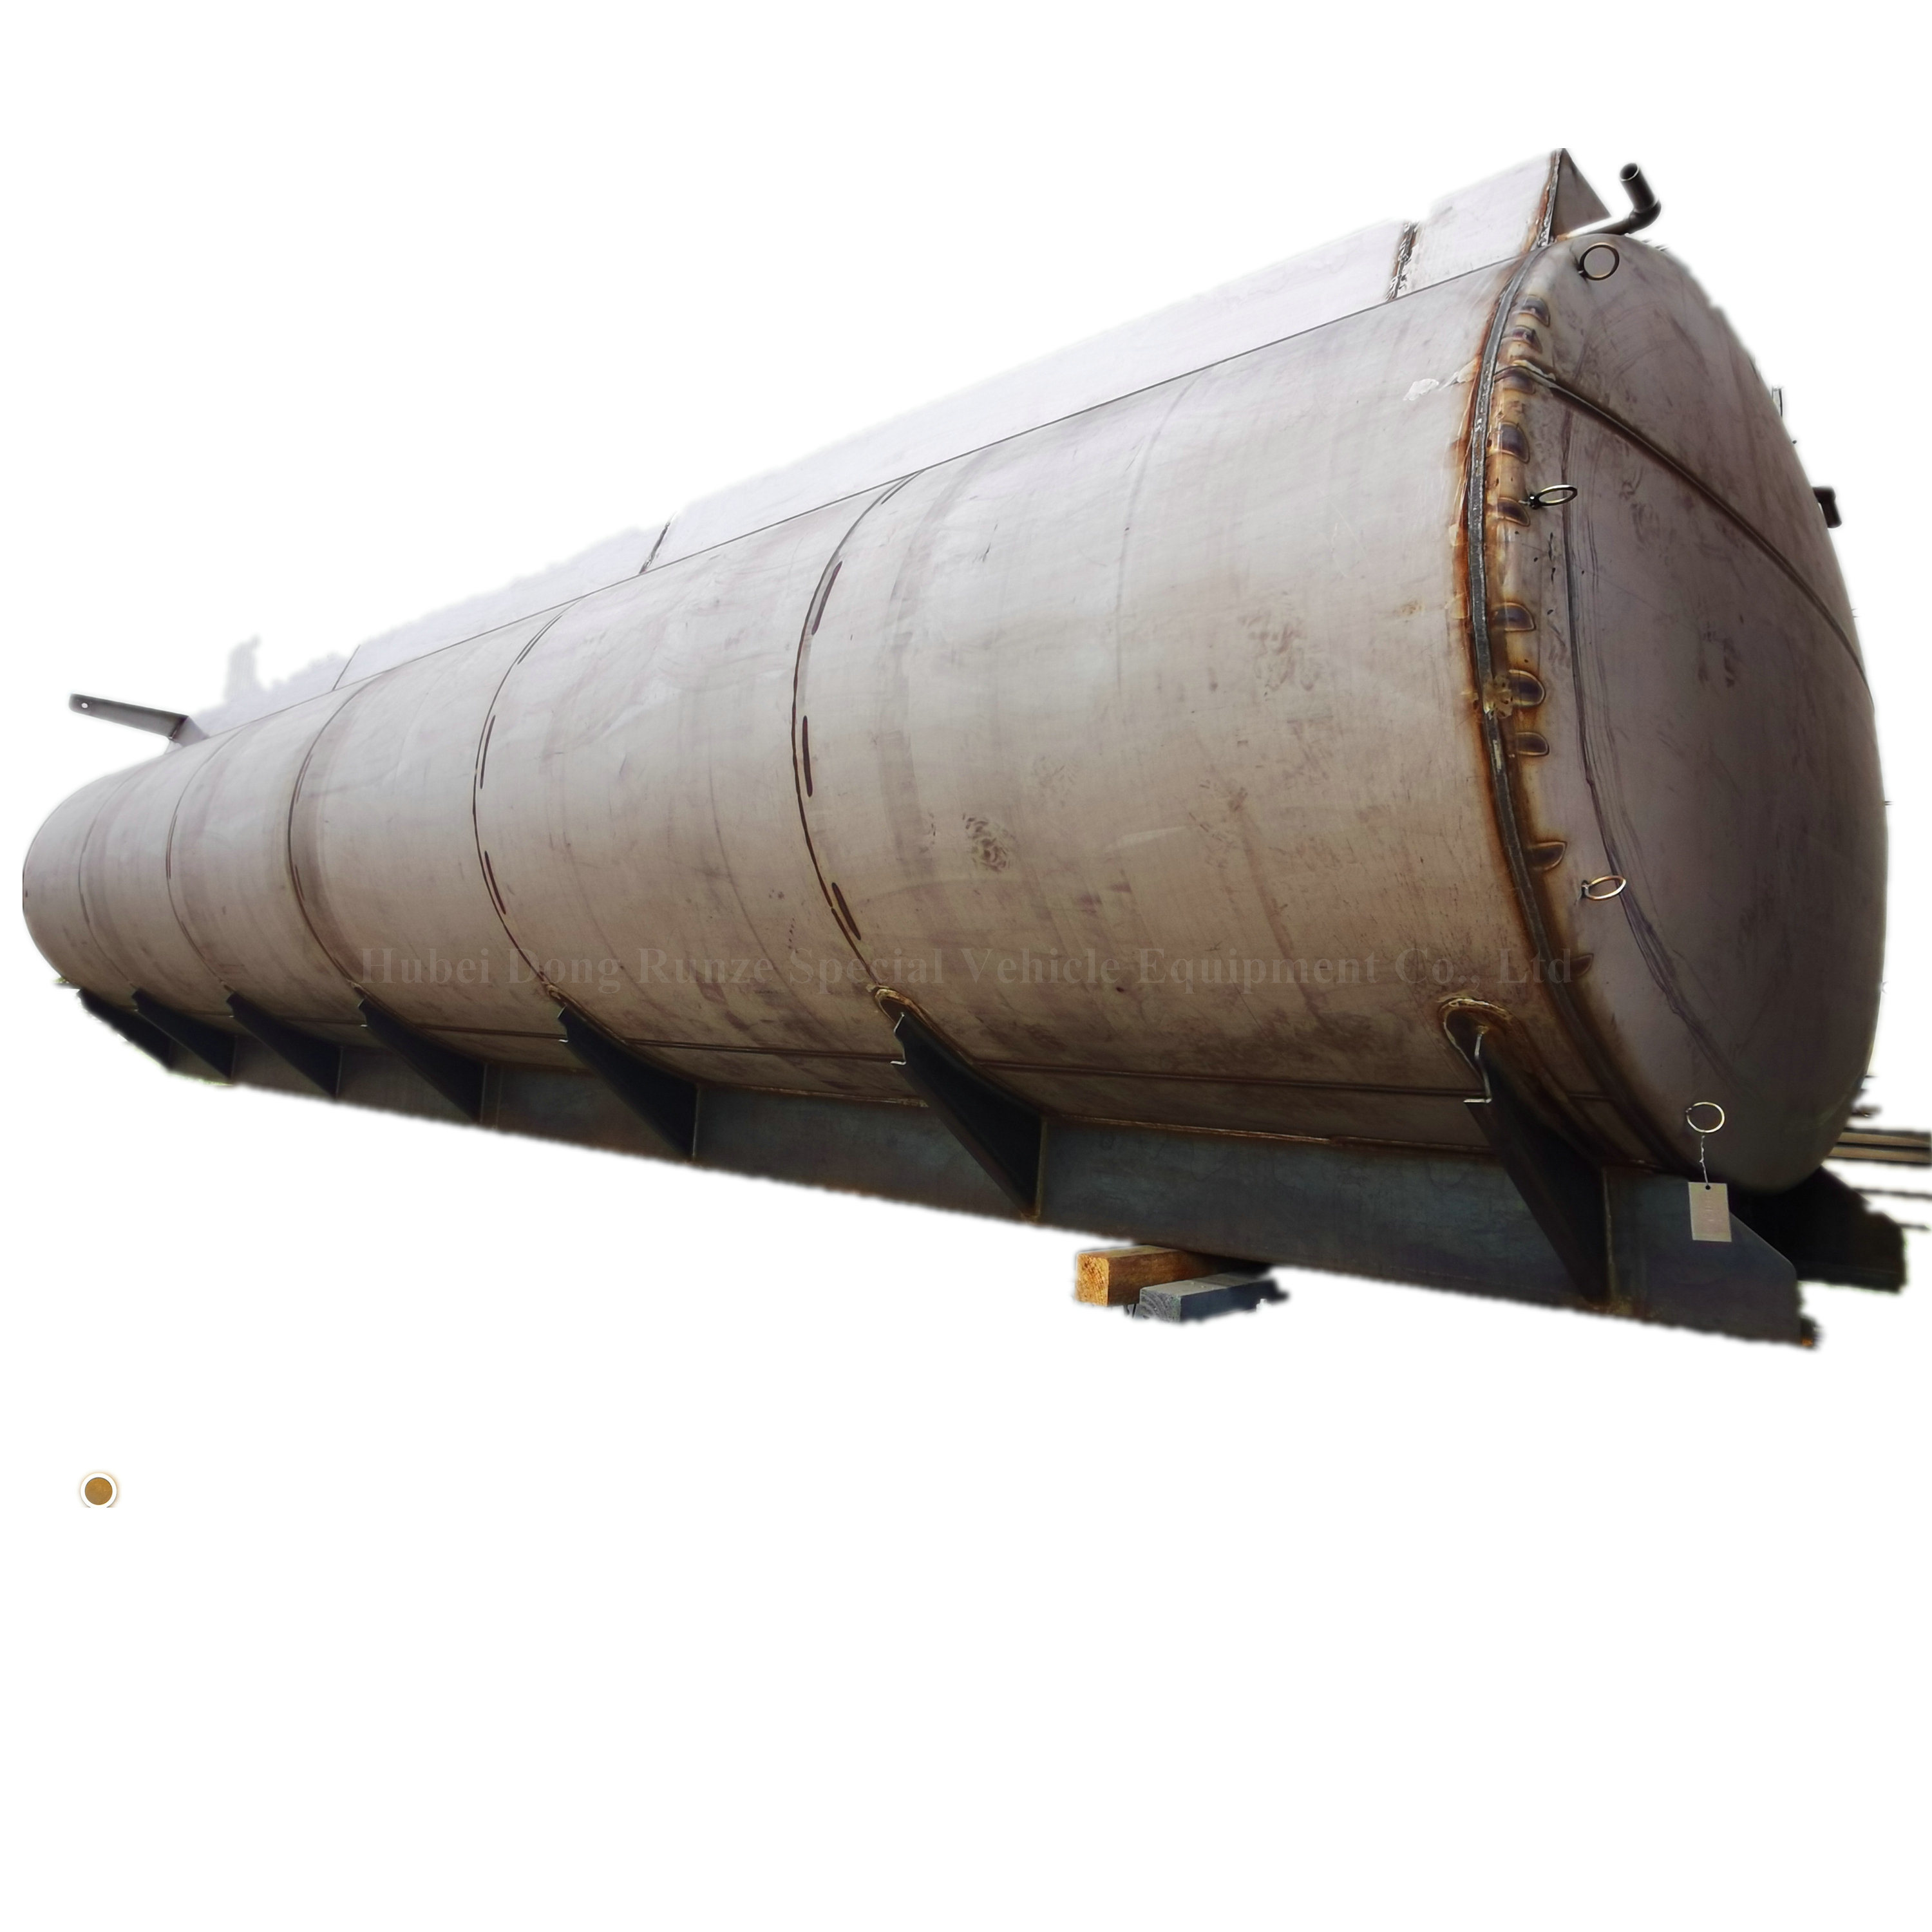 Costumizing 5m3-50m3 Stainless Steel Elliptical Tank Body for Transport Oil ,Water ,Chemical